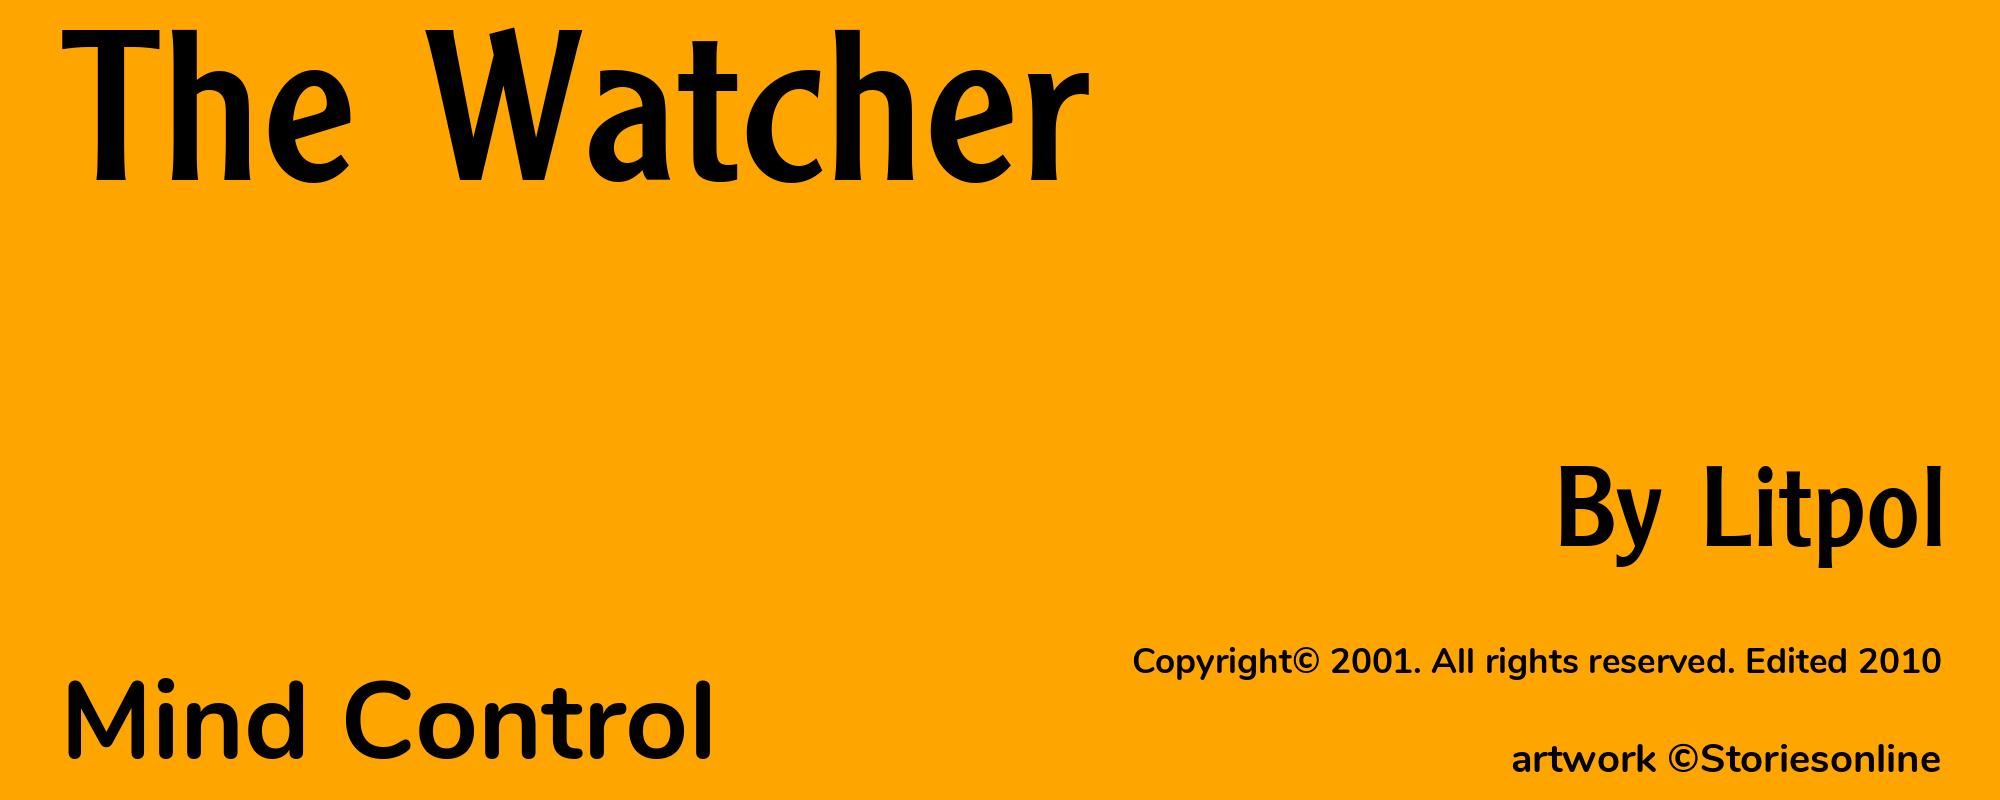 The Watcher - Cover